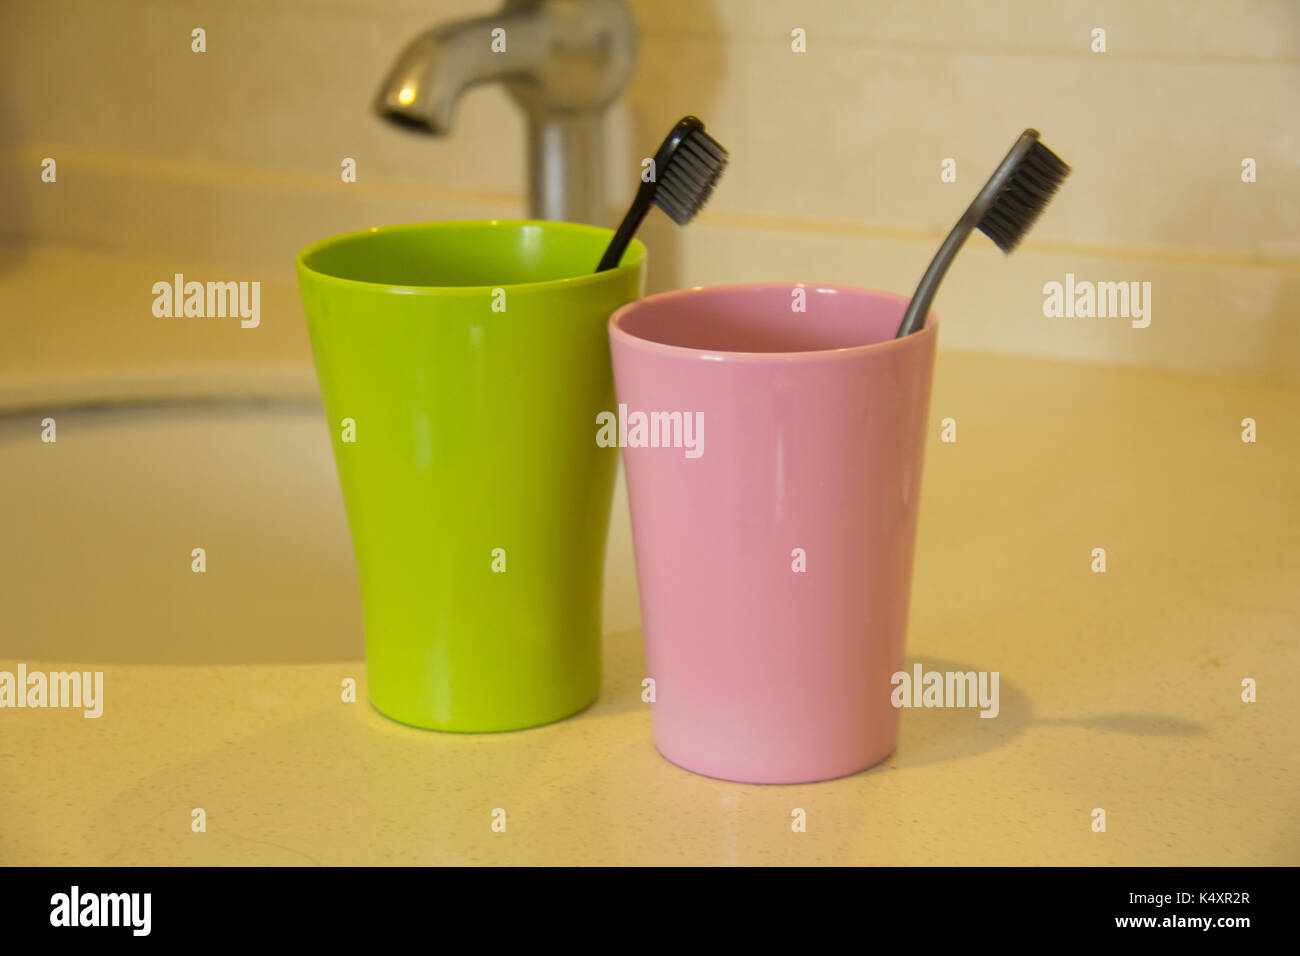 Toothbrush and cups Stock Photo